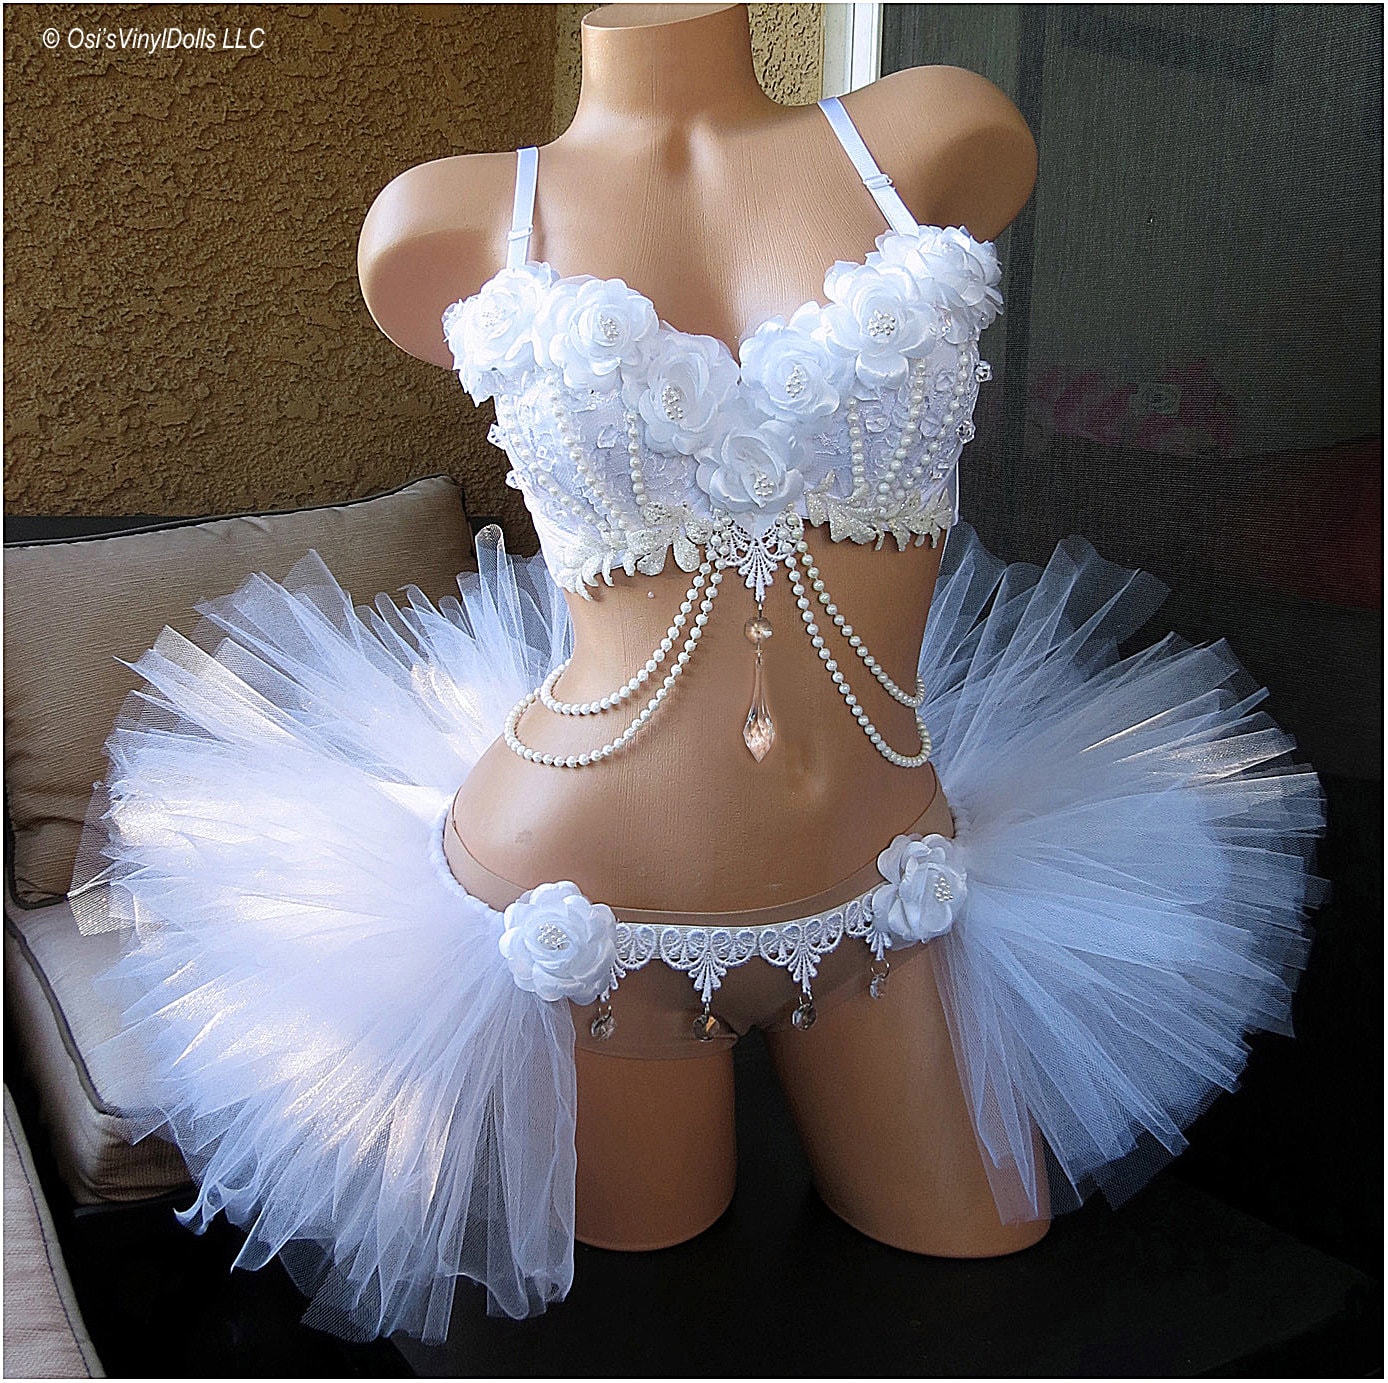 Rave Outfit Bustier Top Crystal Gemstone Festival Clothing Bridal  Bachelorette Party Corset Top Rave Clothing Disco Outfit 